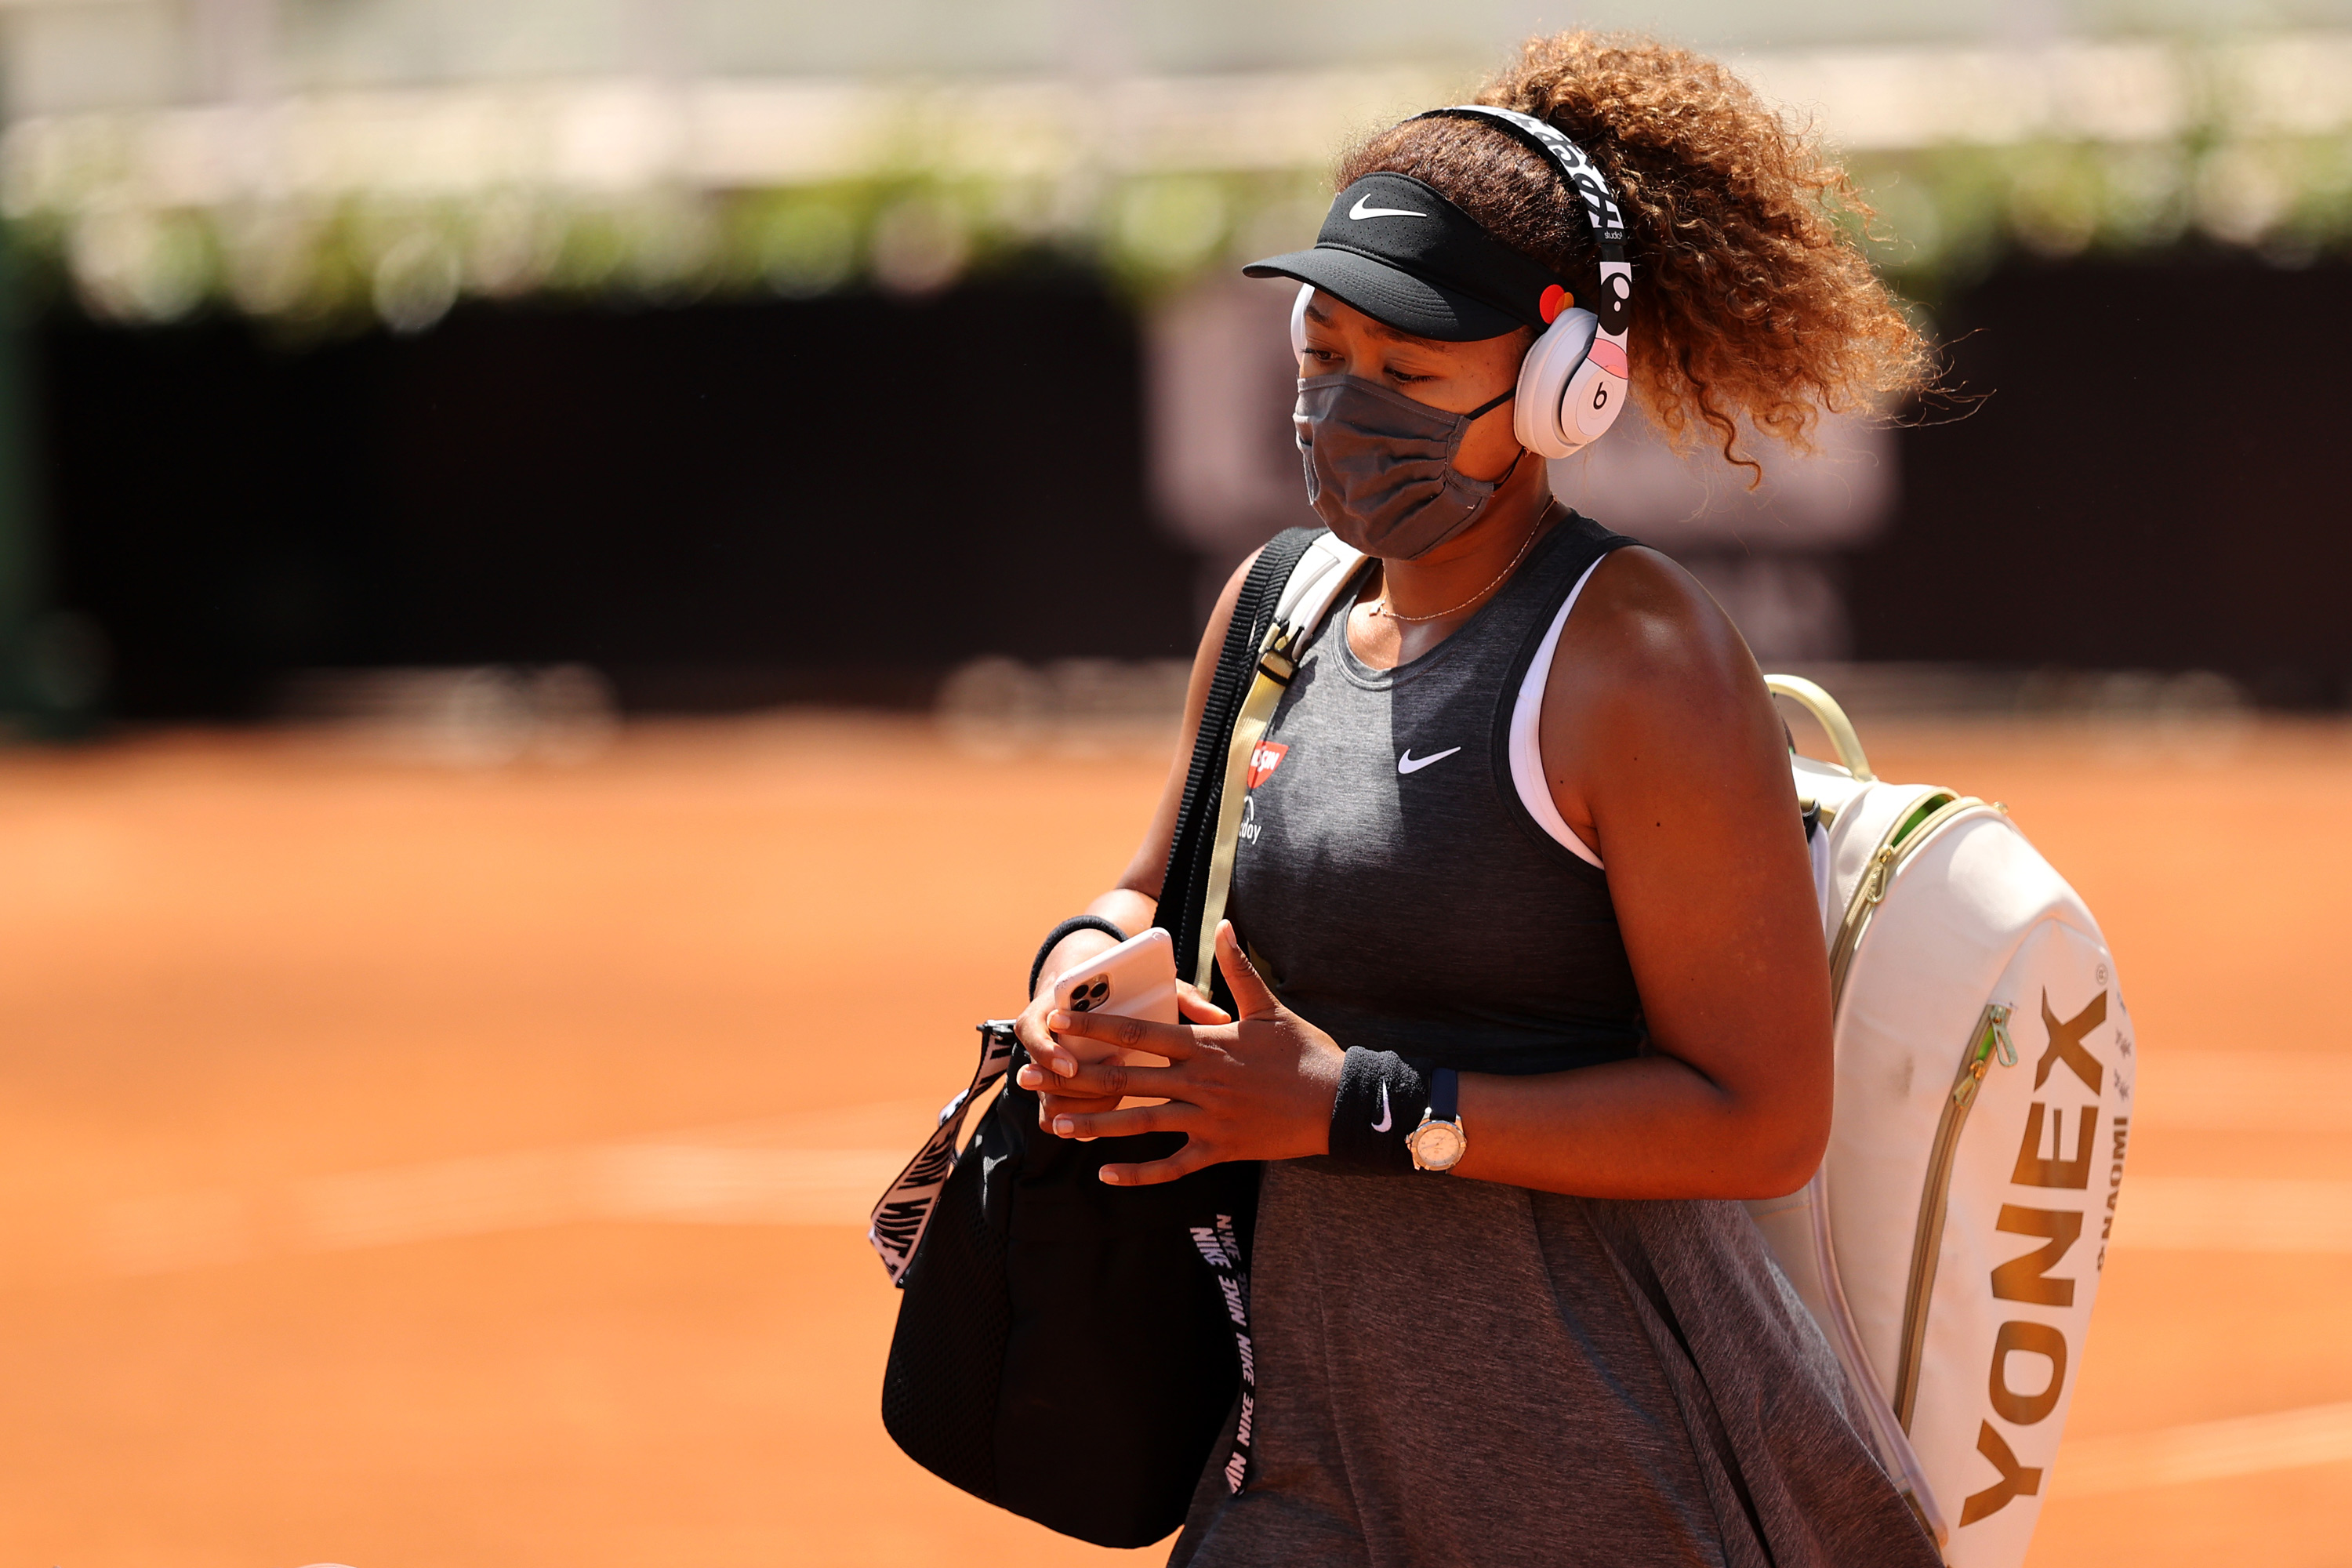 Naomi Osaka S Withdrawal From The French Open Highlights The Tenuous Relationship Between Athletes And The Media Cnn